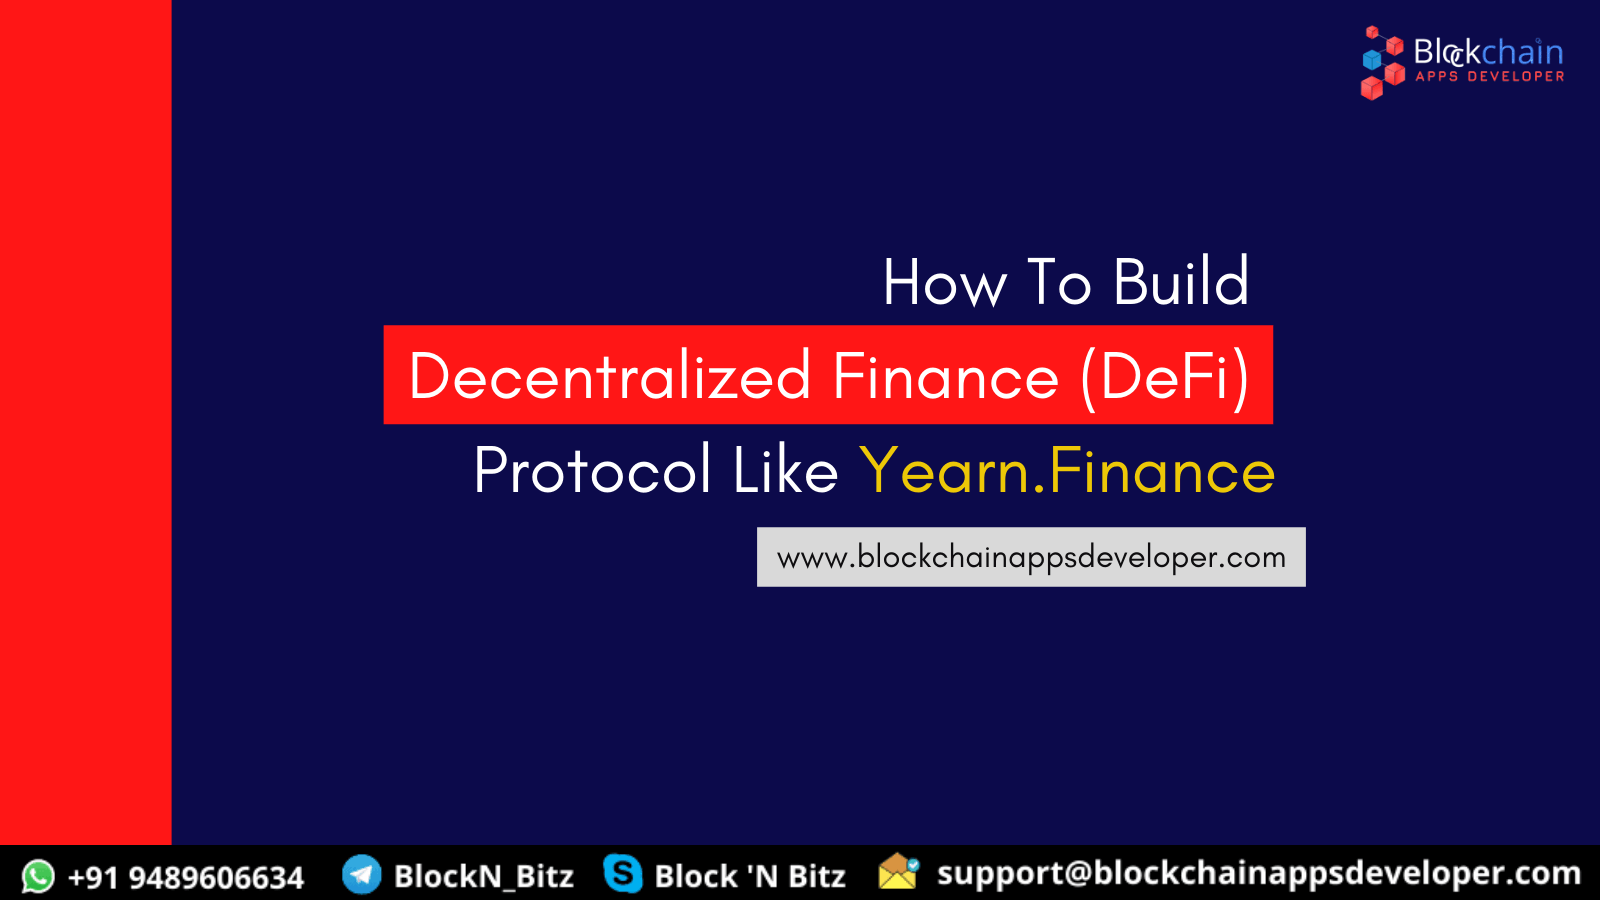 How to Build Decentralized Finance (DeFi) Protocol Product Like Yearn.finance?